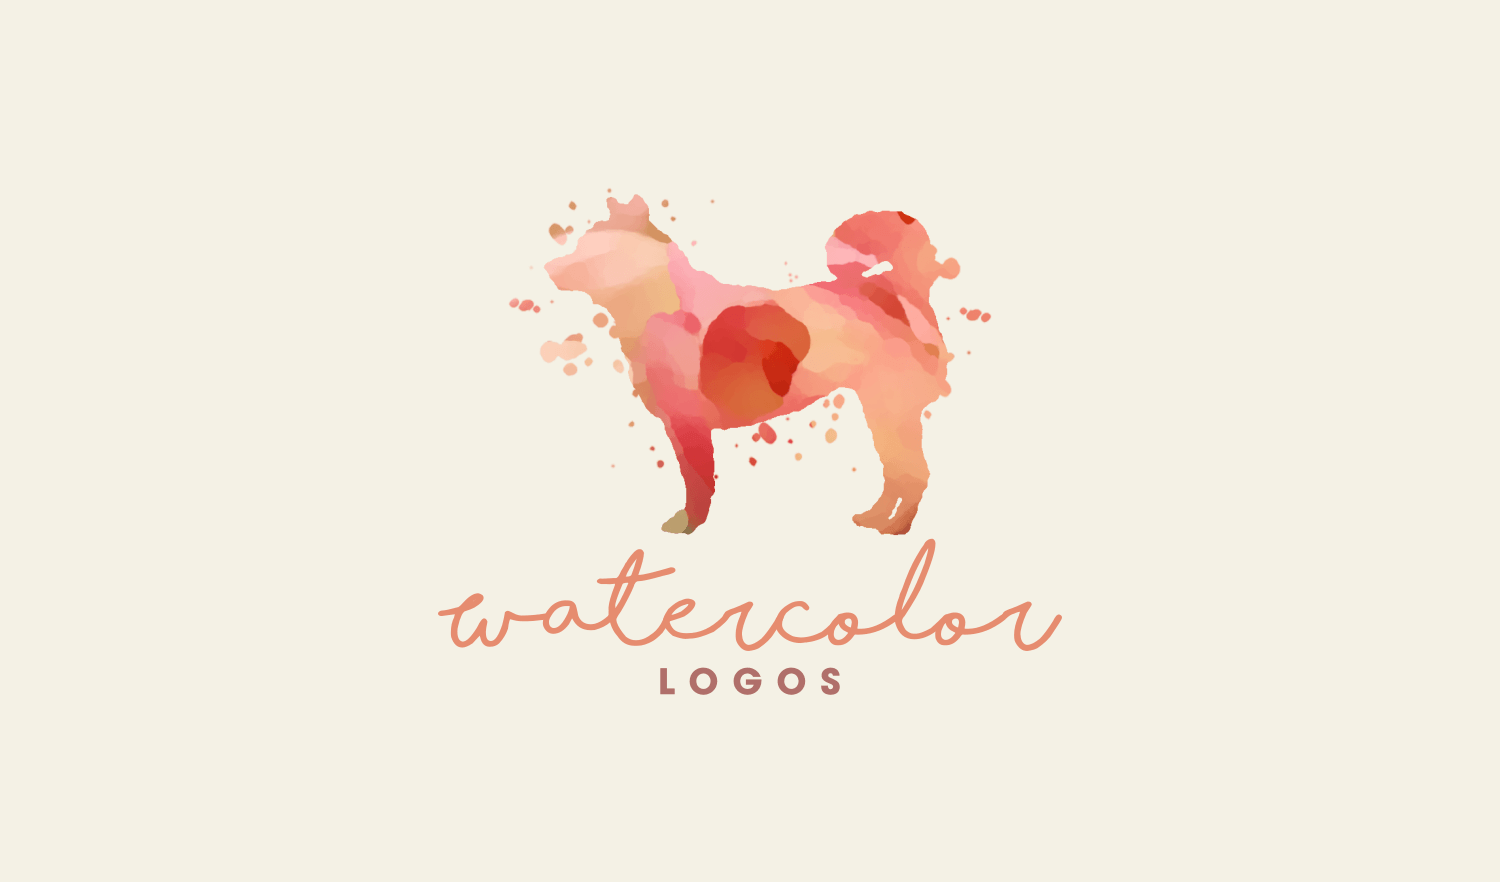 Watercolor Logo - How To Create Watercolor Logos with GIMP. Logos By Nick